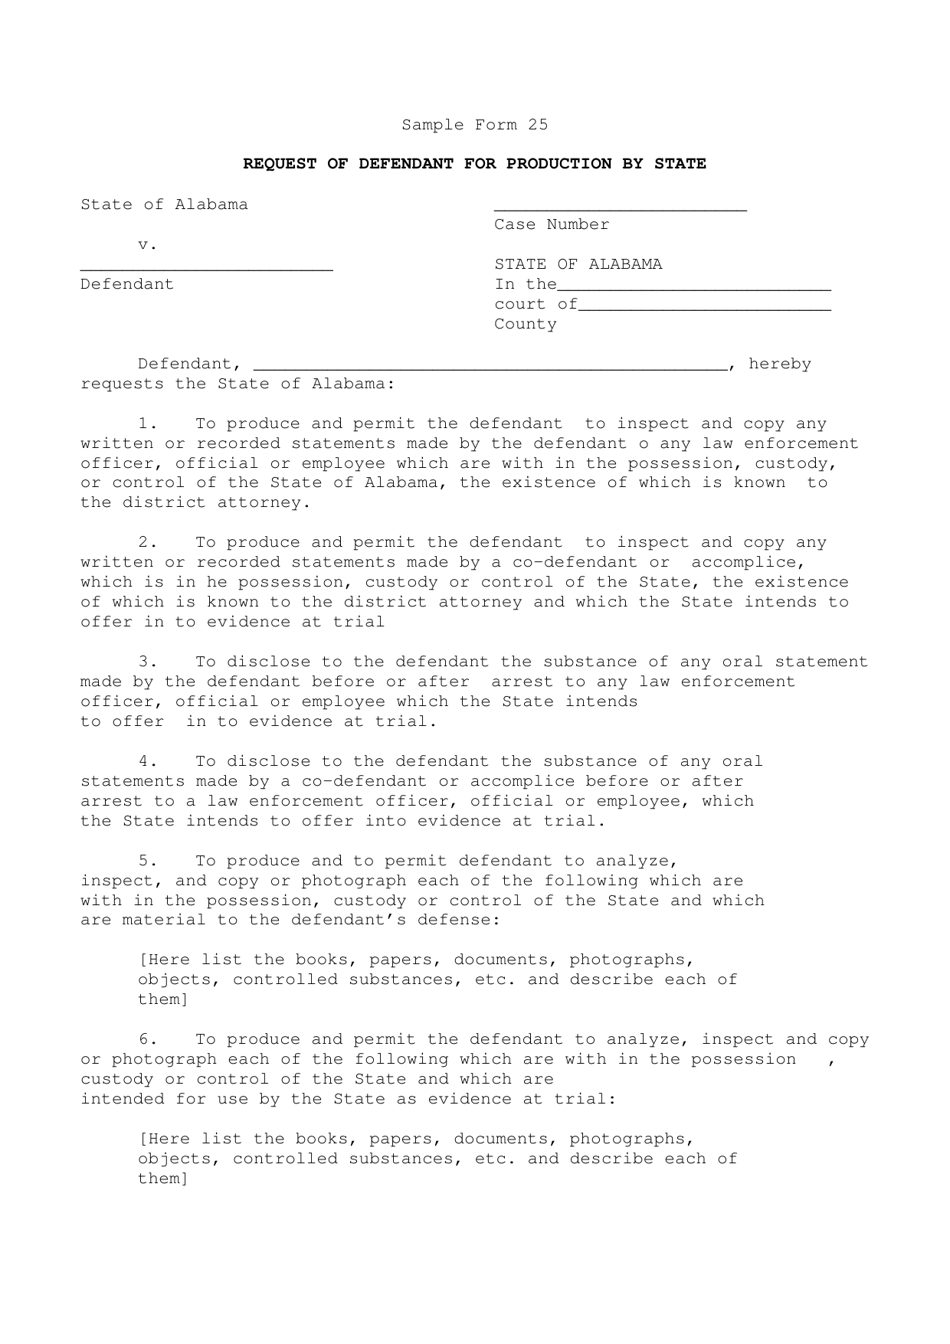 Sample Form 25 Request of Defendant for Production by State - Alabama, Page 1